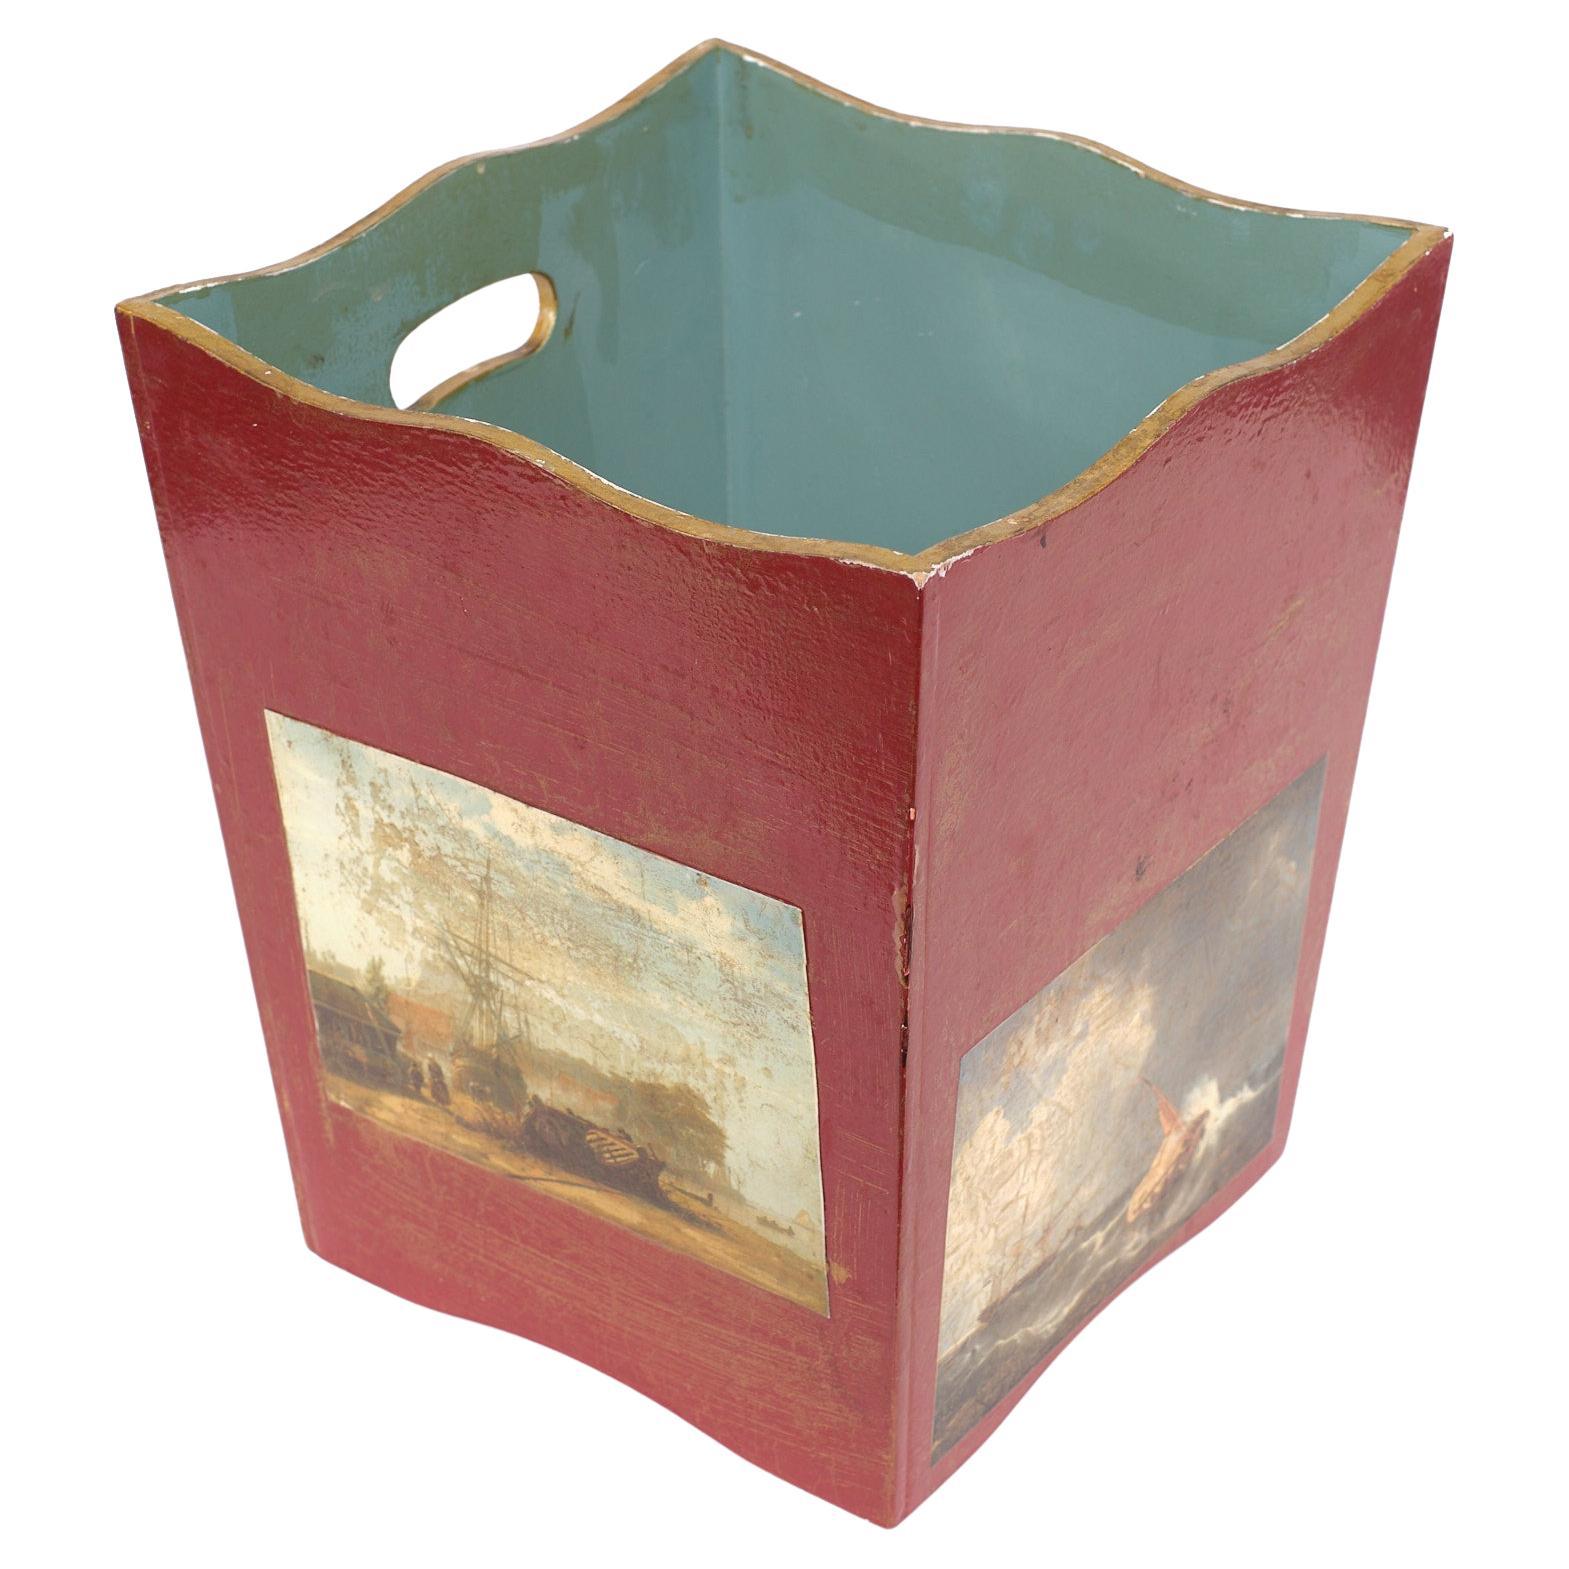 Very nice Wooden Paper Waste Basket .Stone Red color .with Gold details  Comes with 
naval battles Lithographs . Beautiful Sea Foam Green inside .1950s  .original condition   